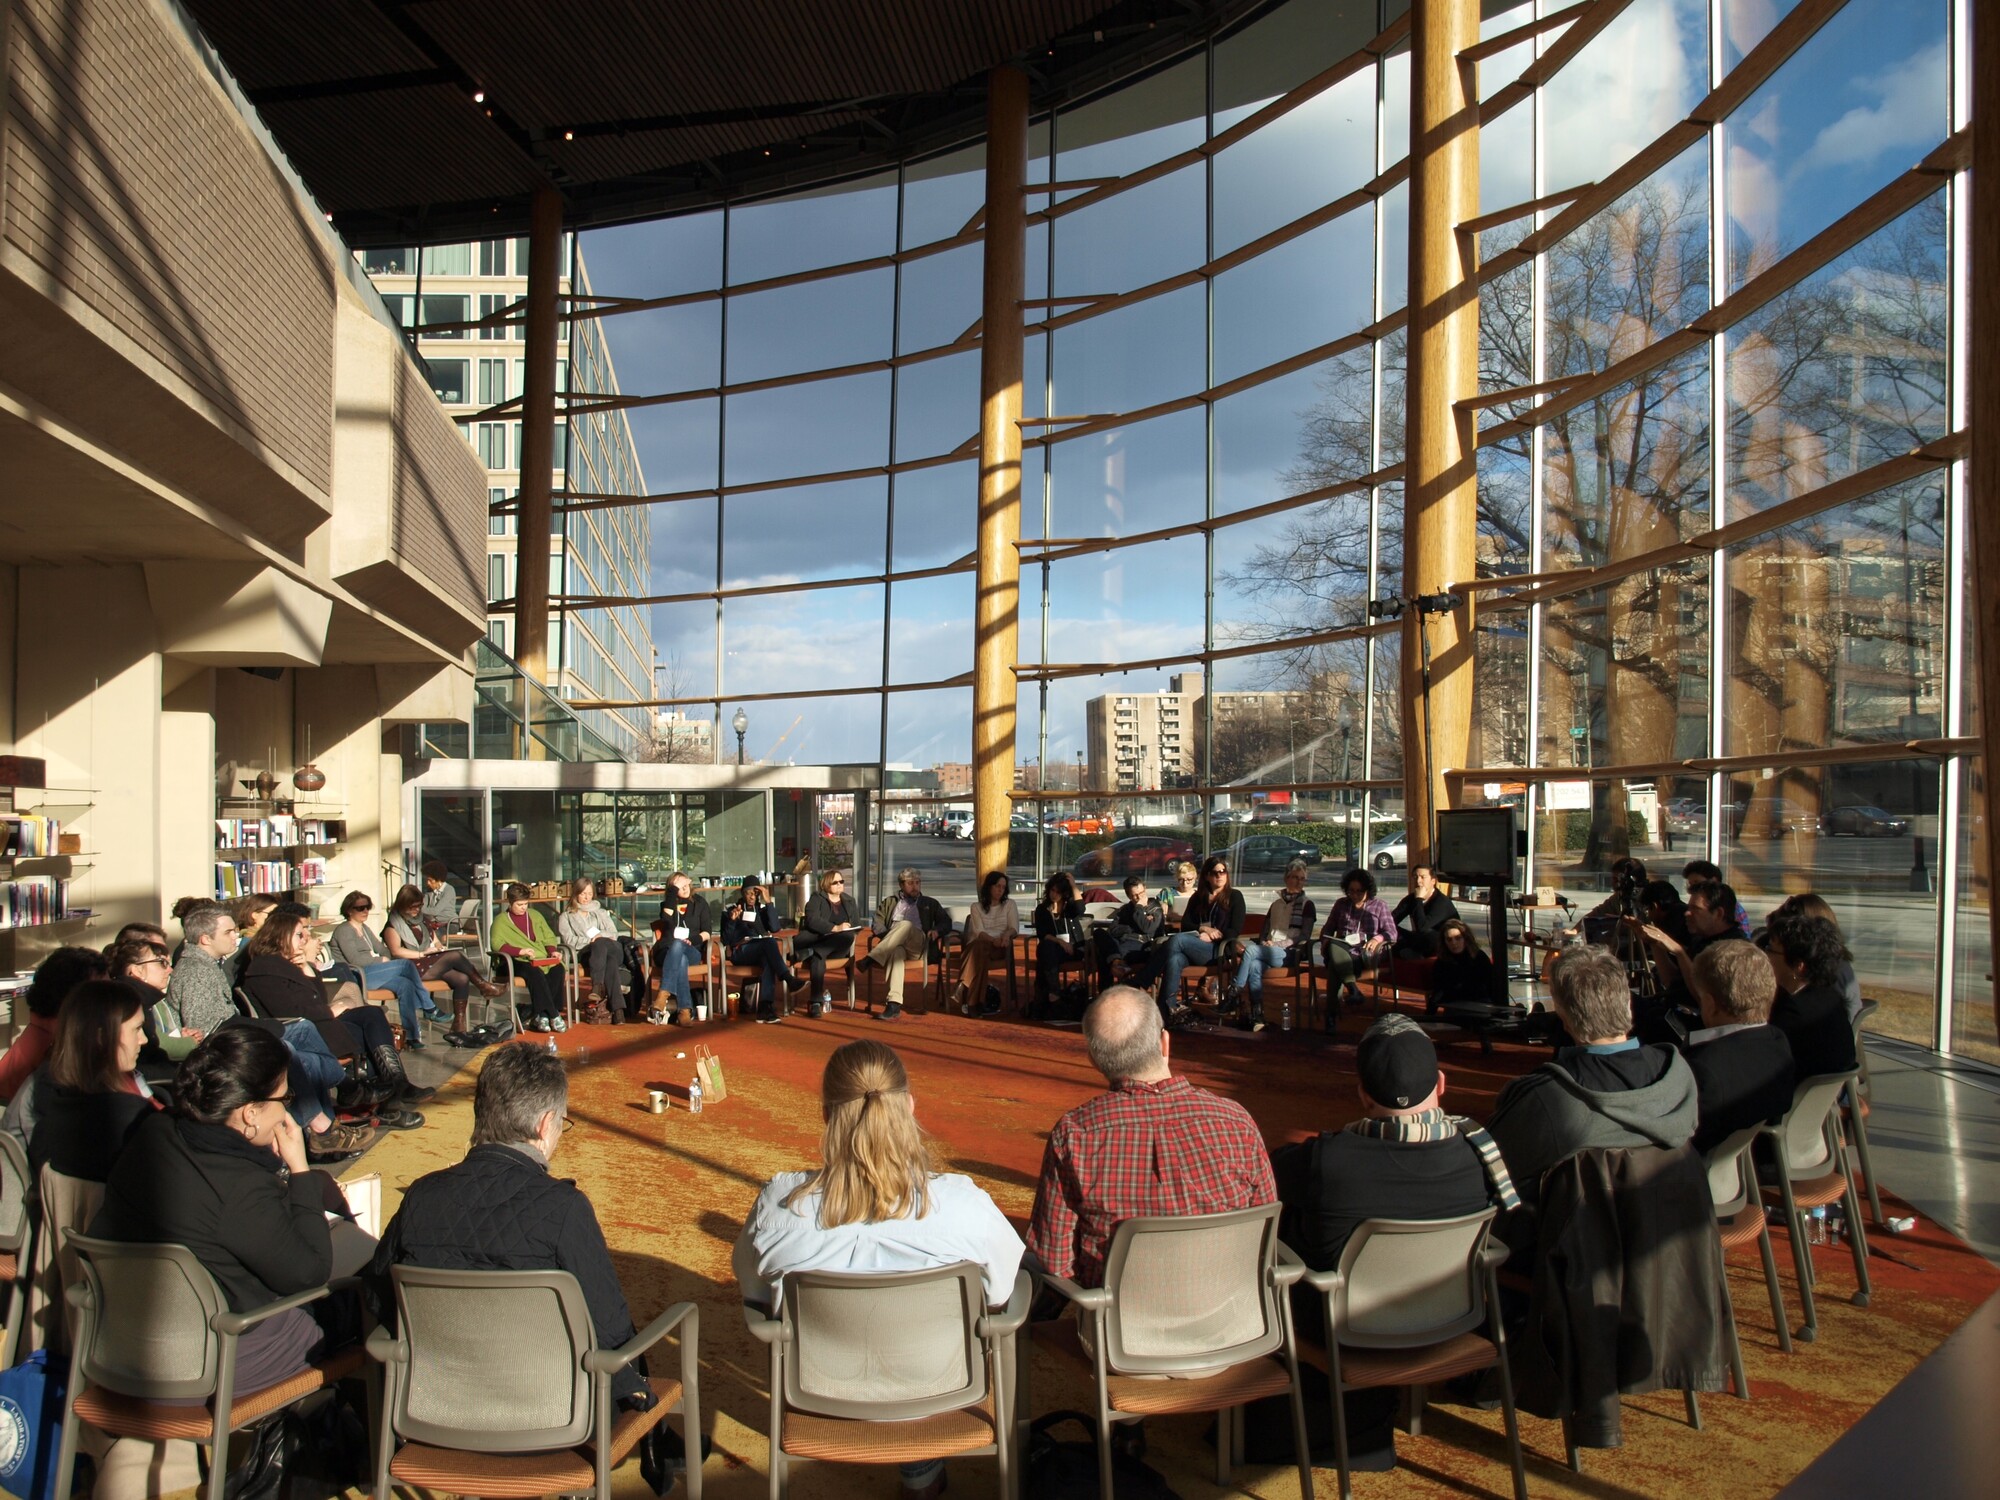 Convening attendees sit in a circle